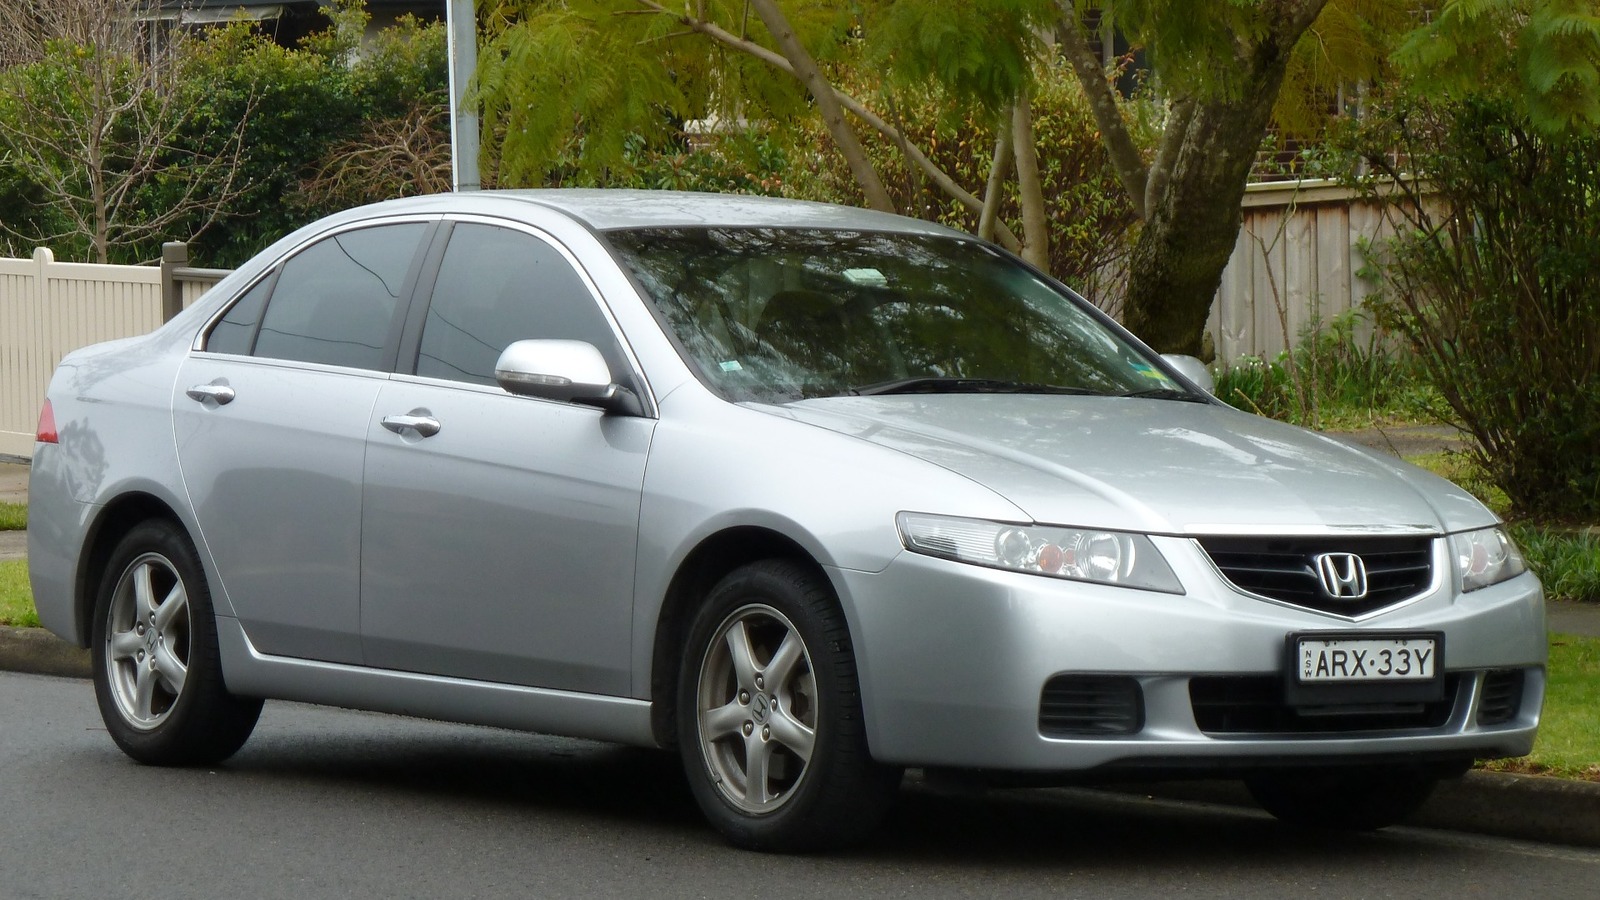 Are Old Honda Accords Still Good Cars, & What's The Cheapest You Can Get One For?